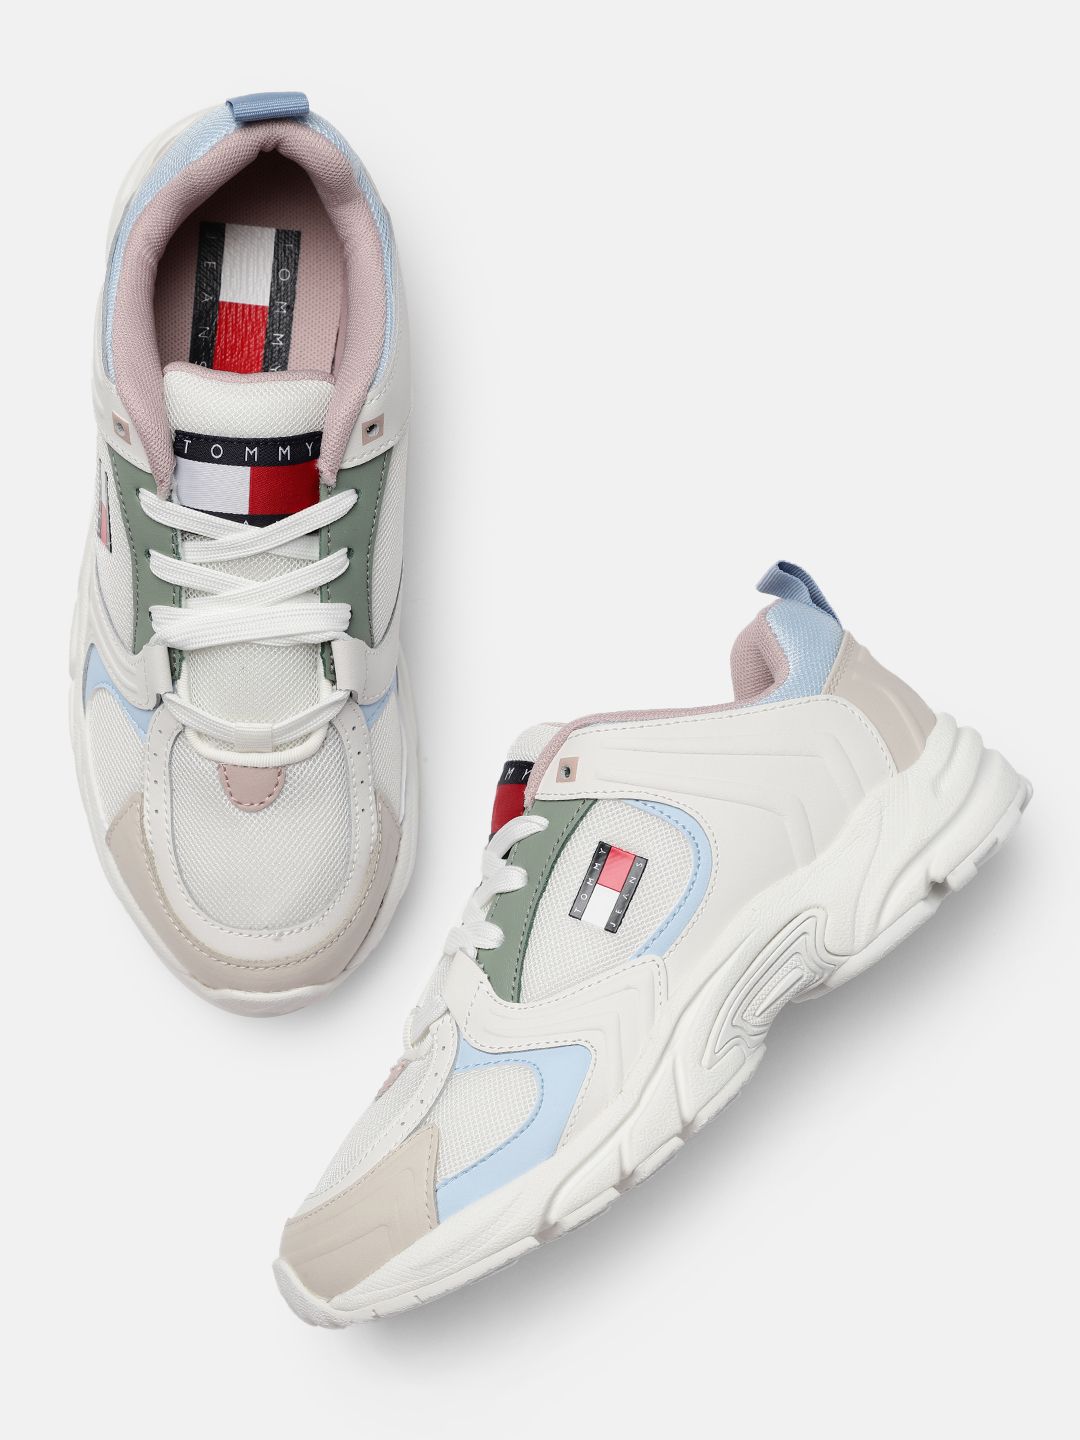 Tommy Hilfiger Jeans Women Off White Colourblocked City Runner Sneakers Price in India